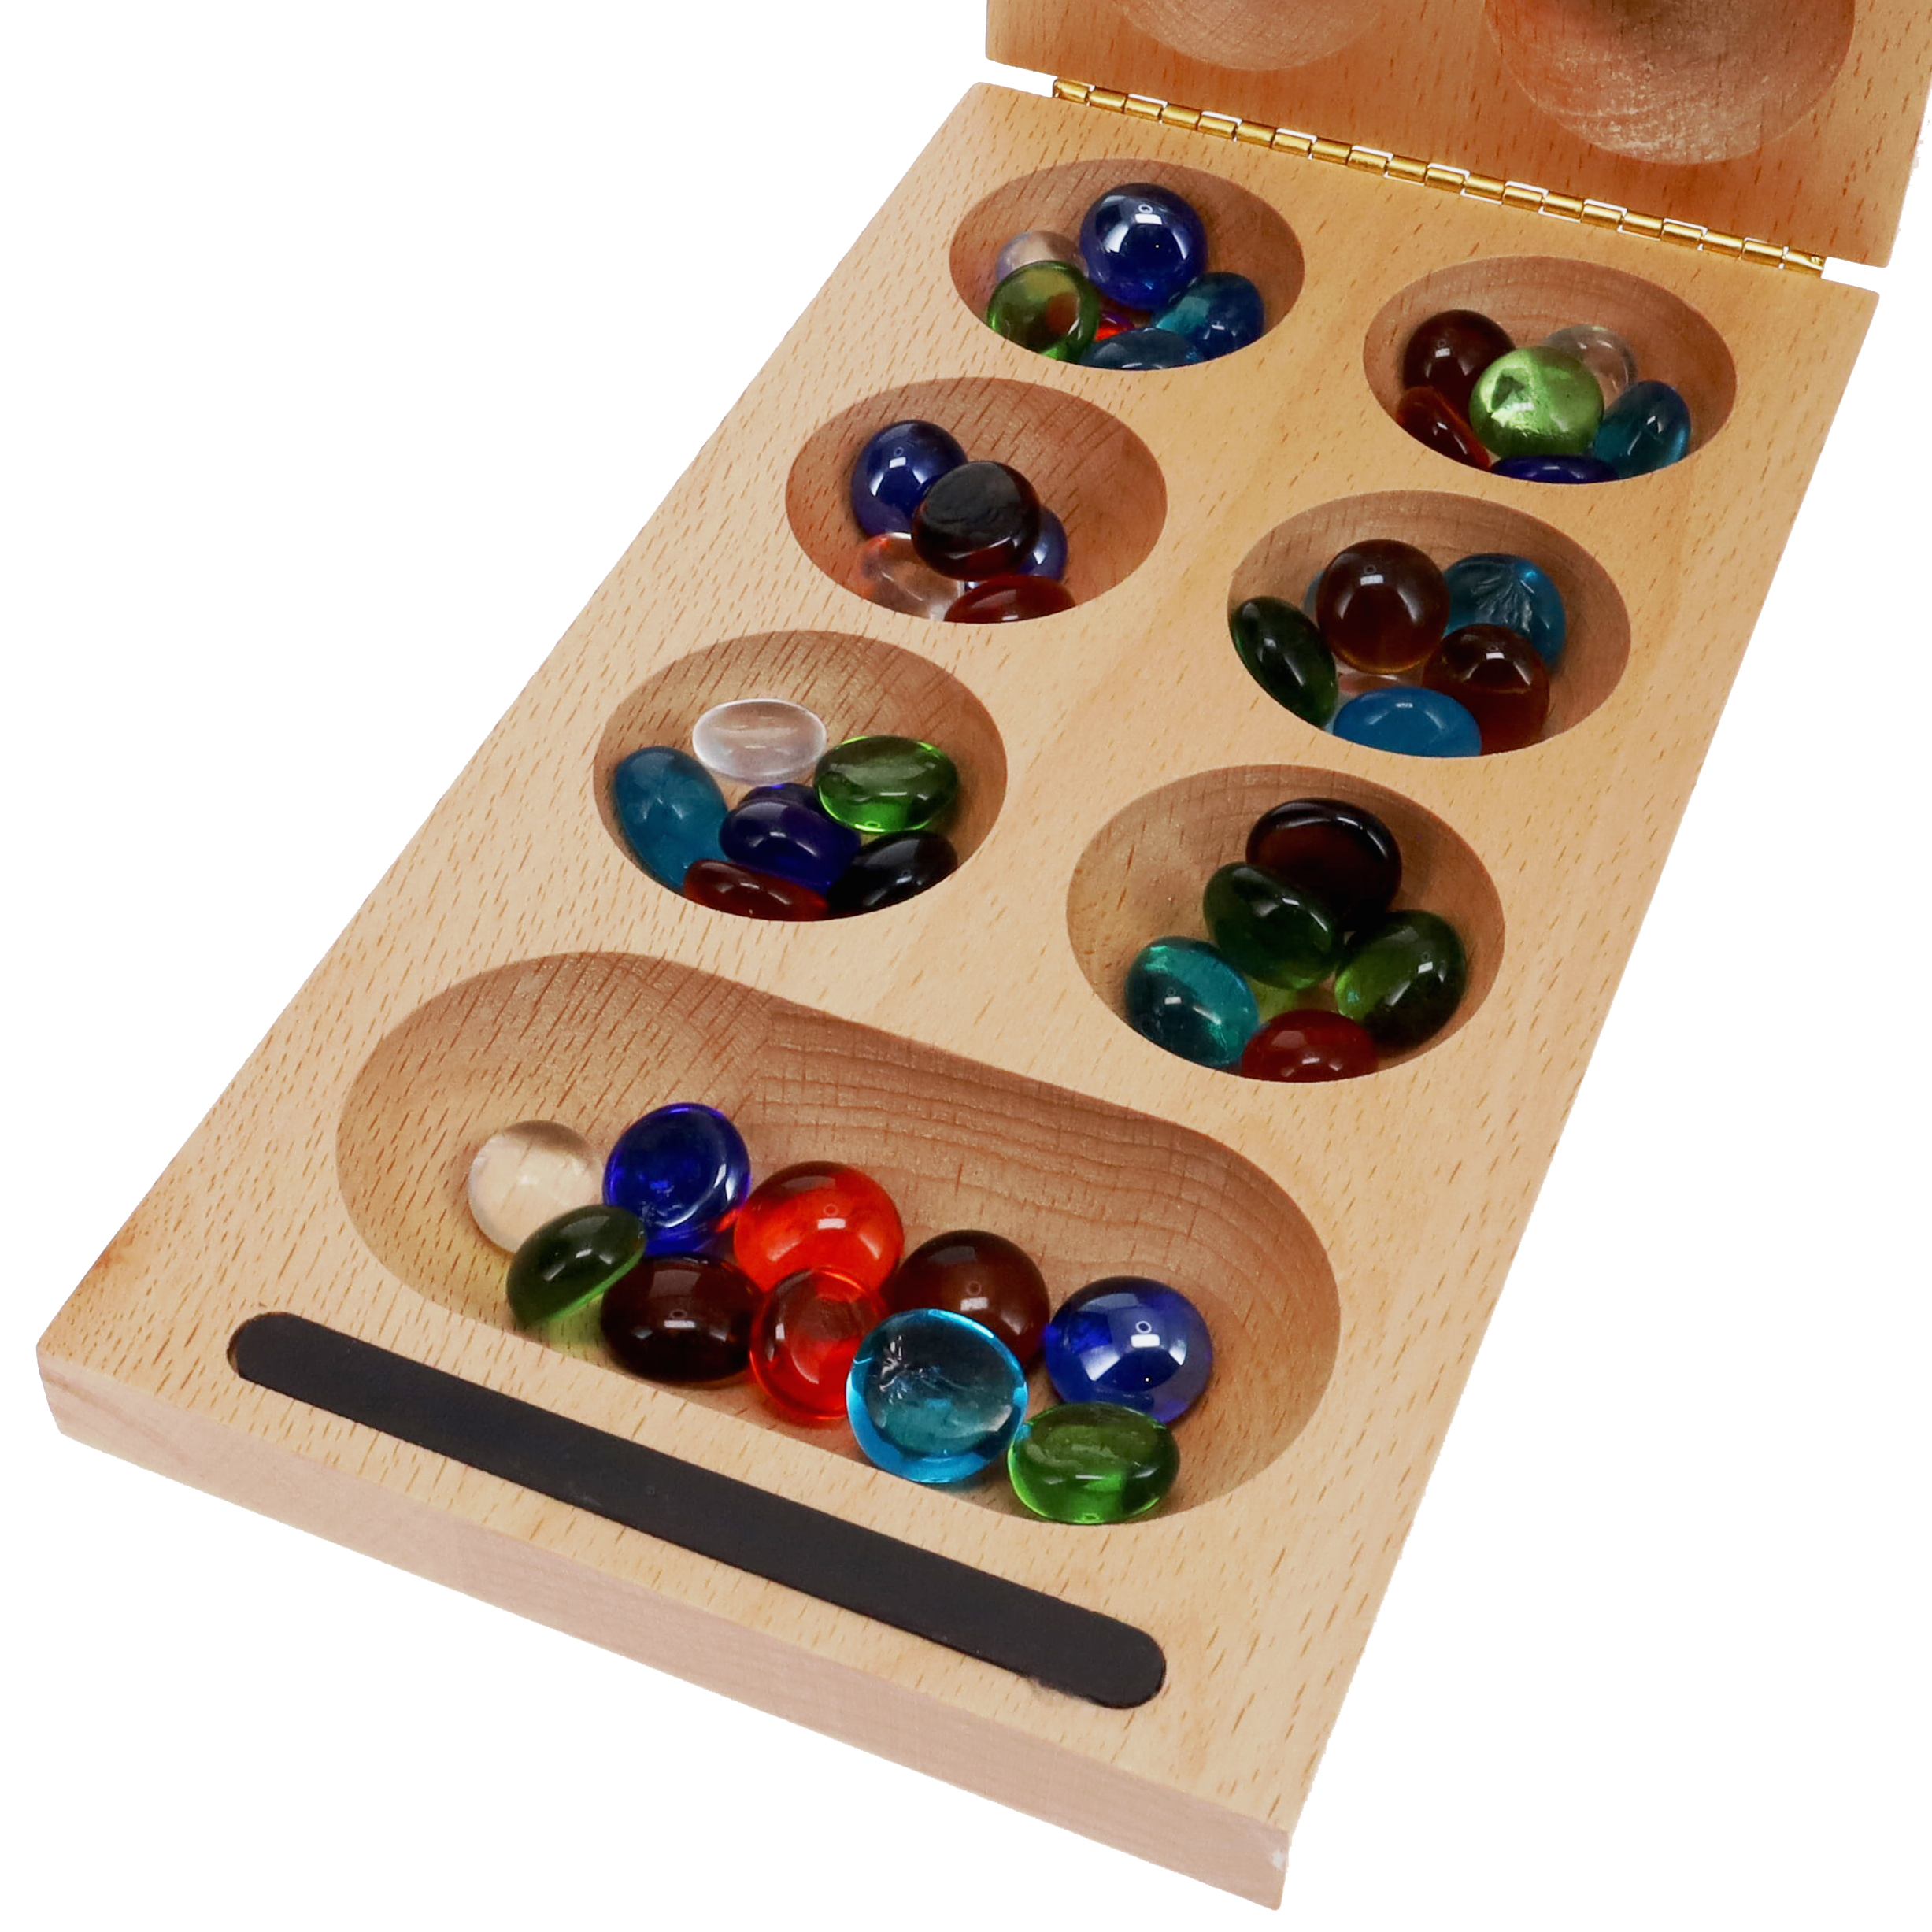 Mancala Board Game with Solid Wood Folding Board 80 Glass Stones